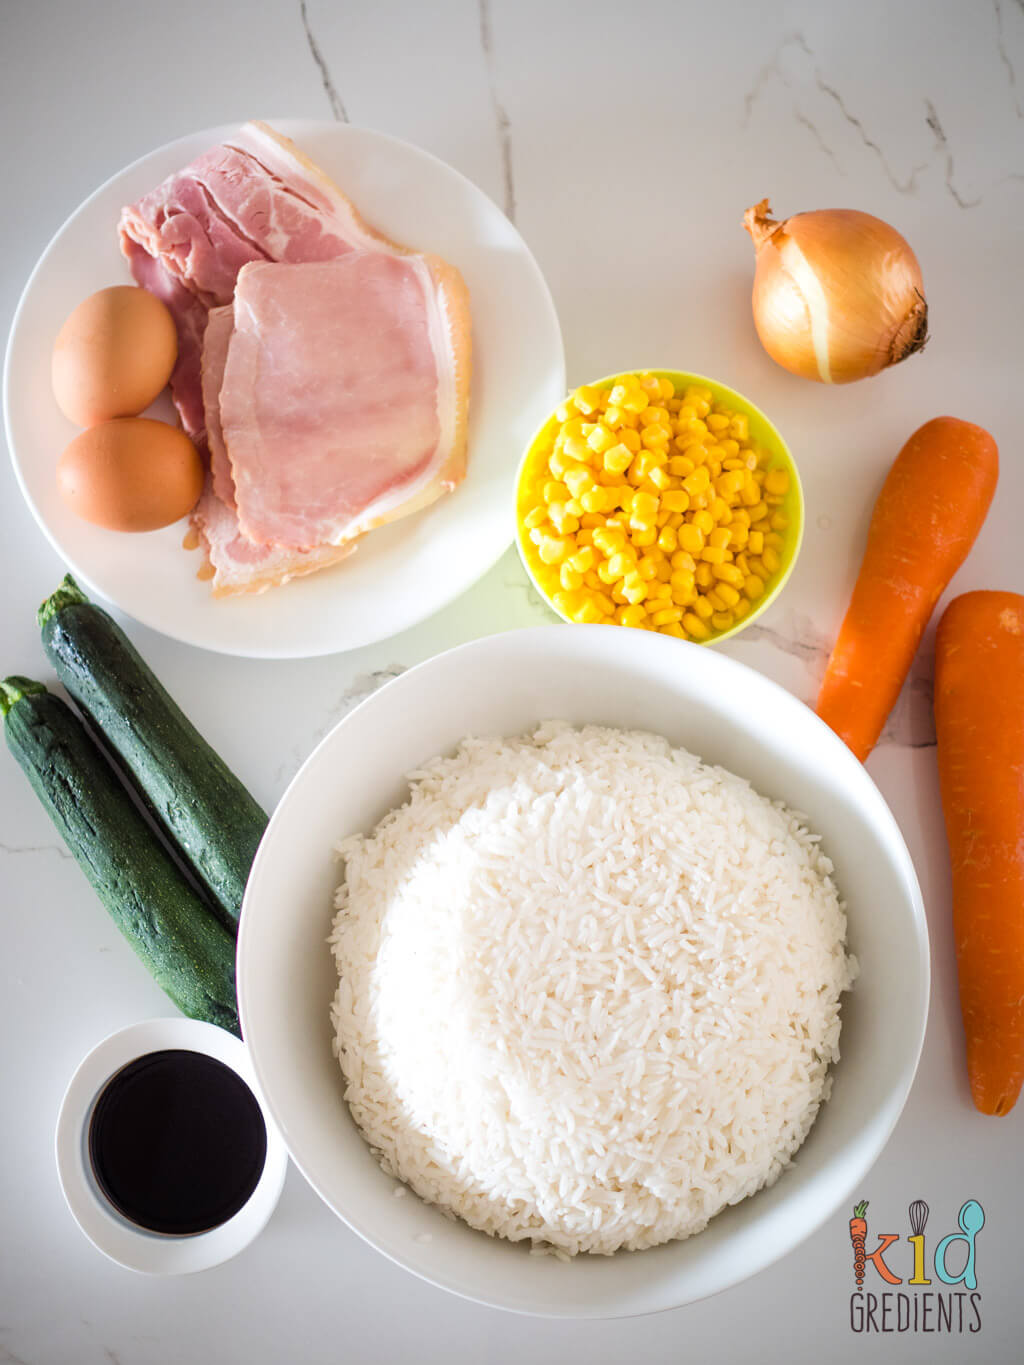 unprepped ingredients: rice, soy sauce, eggs, bacon, zucchini, carrots, corn and onion